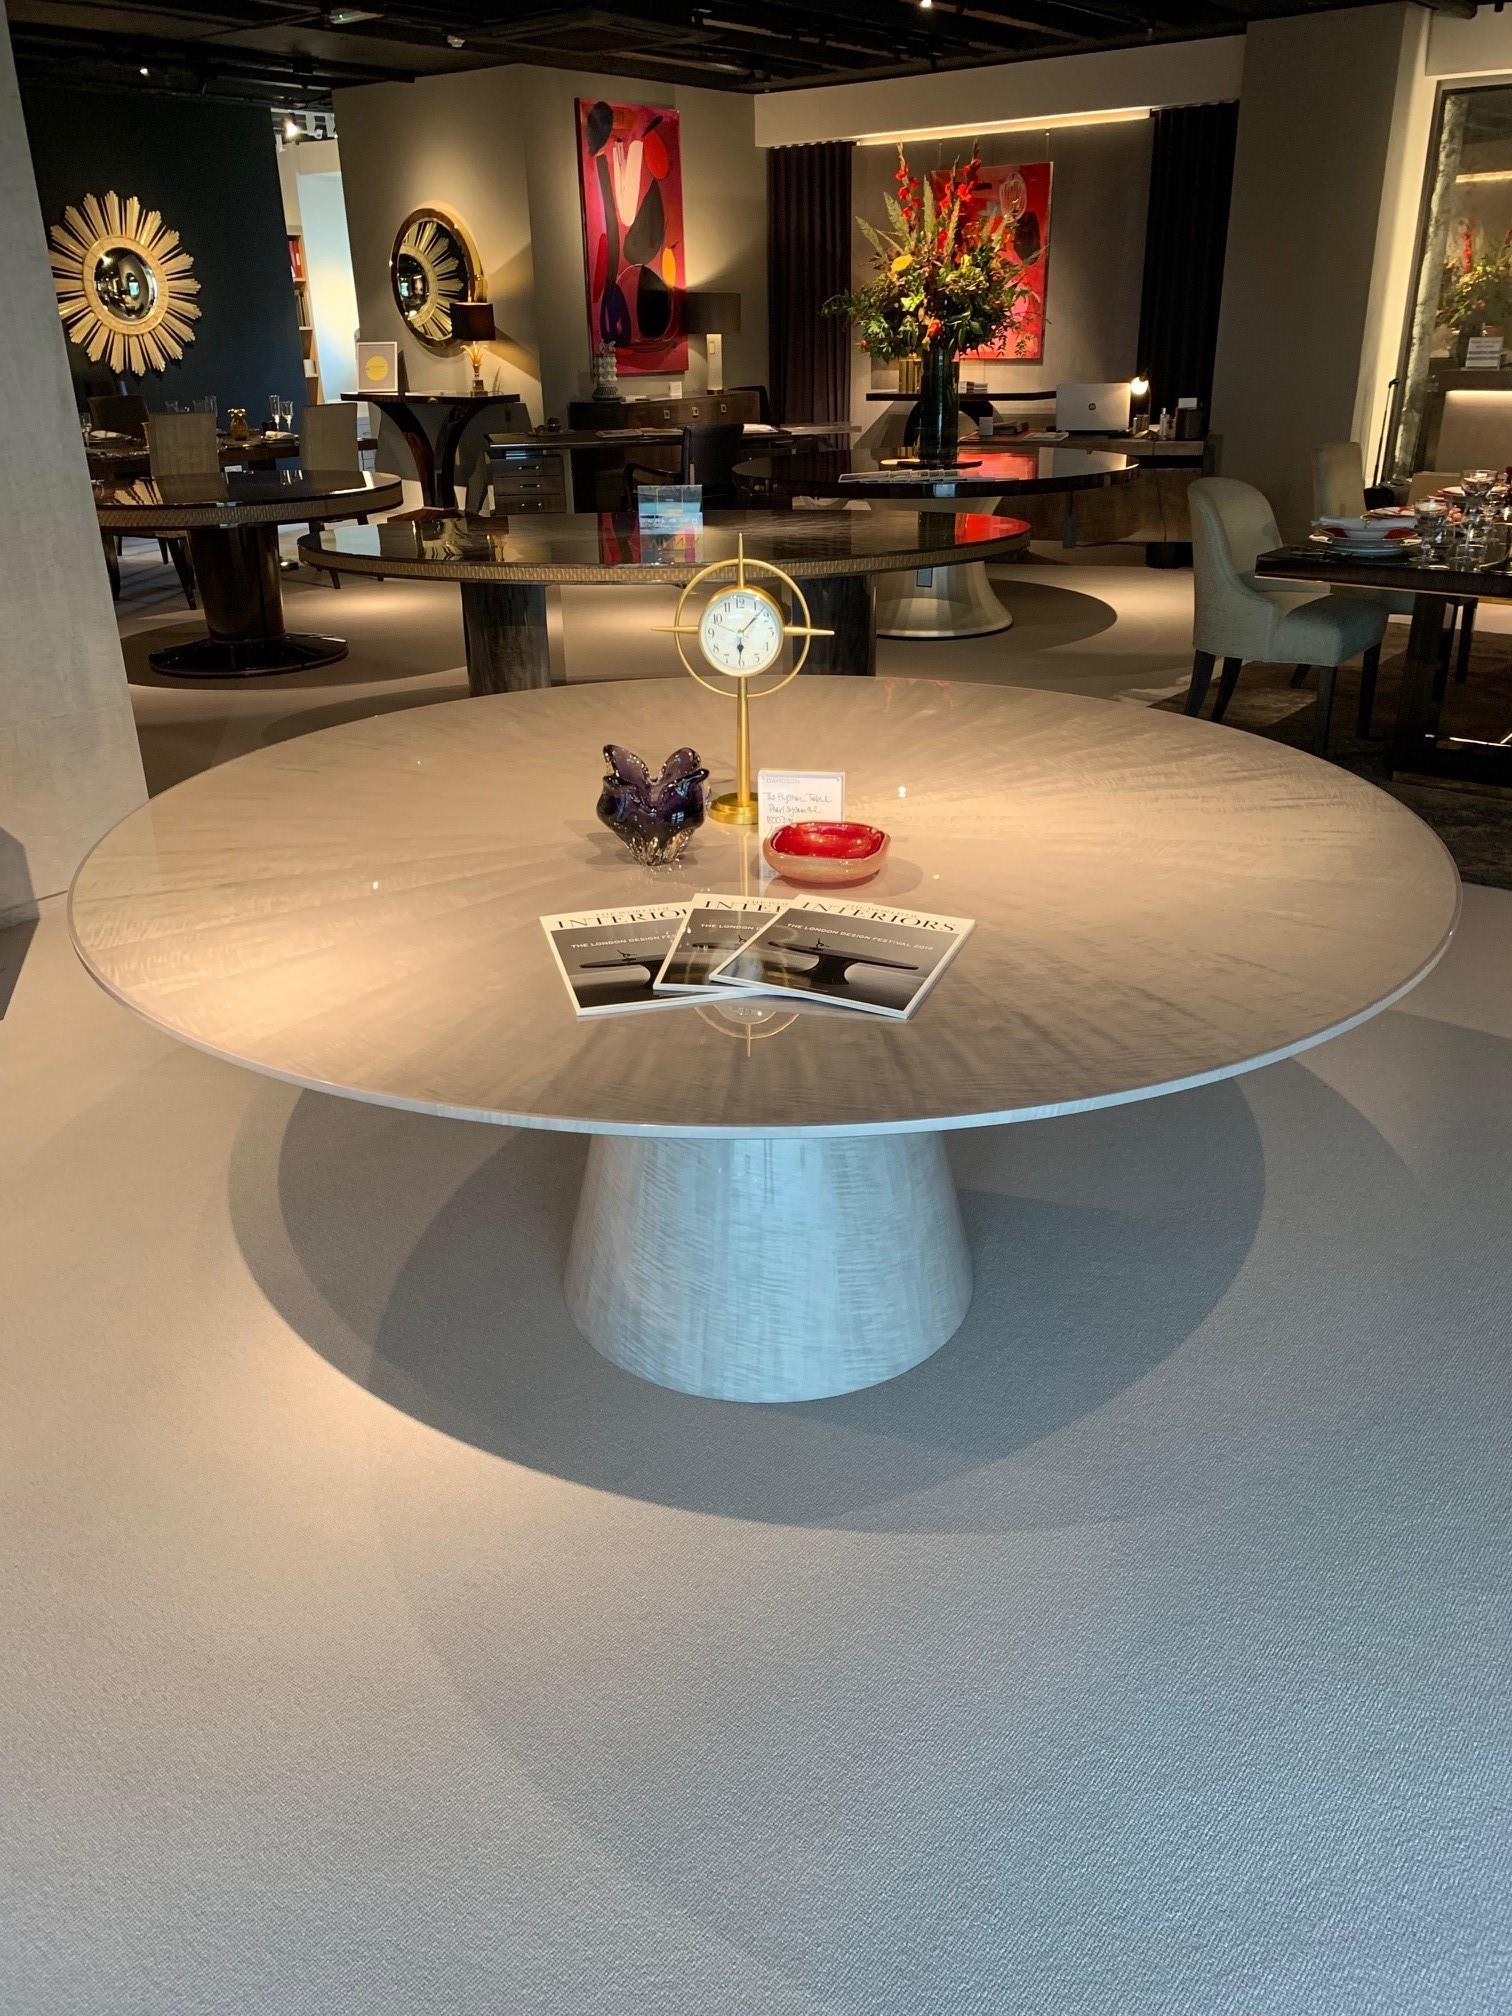 A stunning statement piece that will transform any dining room with its sublime anegre finish and striking silhouette.

The Elystan is part of the sumptuous anegre collection. Superbly sleek, it achieves serious impact and is certainly a table for